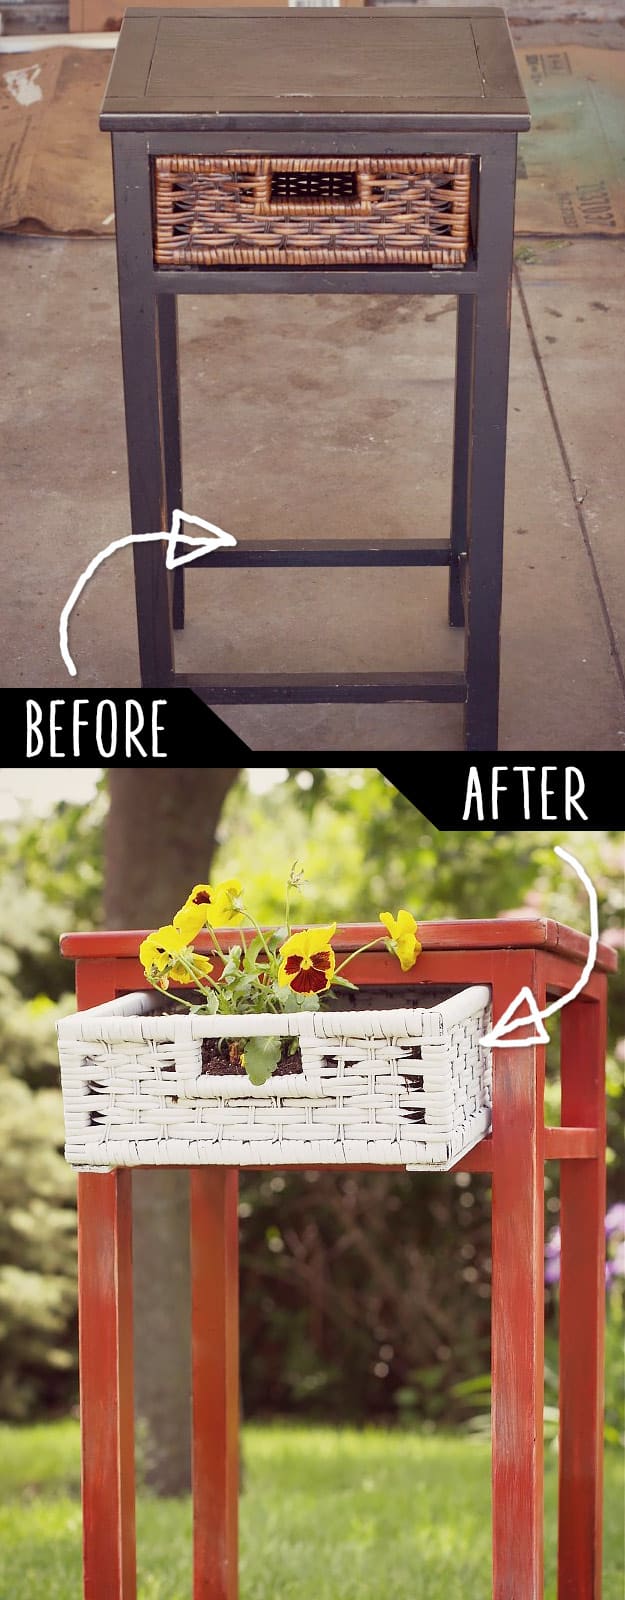 DIY Furniture Hacks | Upcycled Side Table into Planter | Cool Ideas for Creative Do It Yourself Furniture Made From Things You Might Not Expect - http://diyjoy.com/diy-furniture-hacks